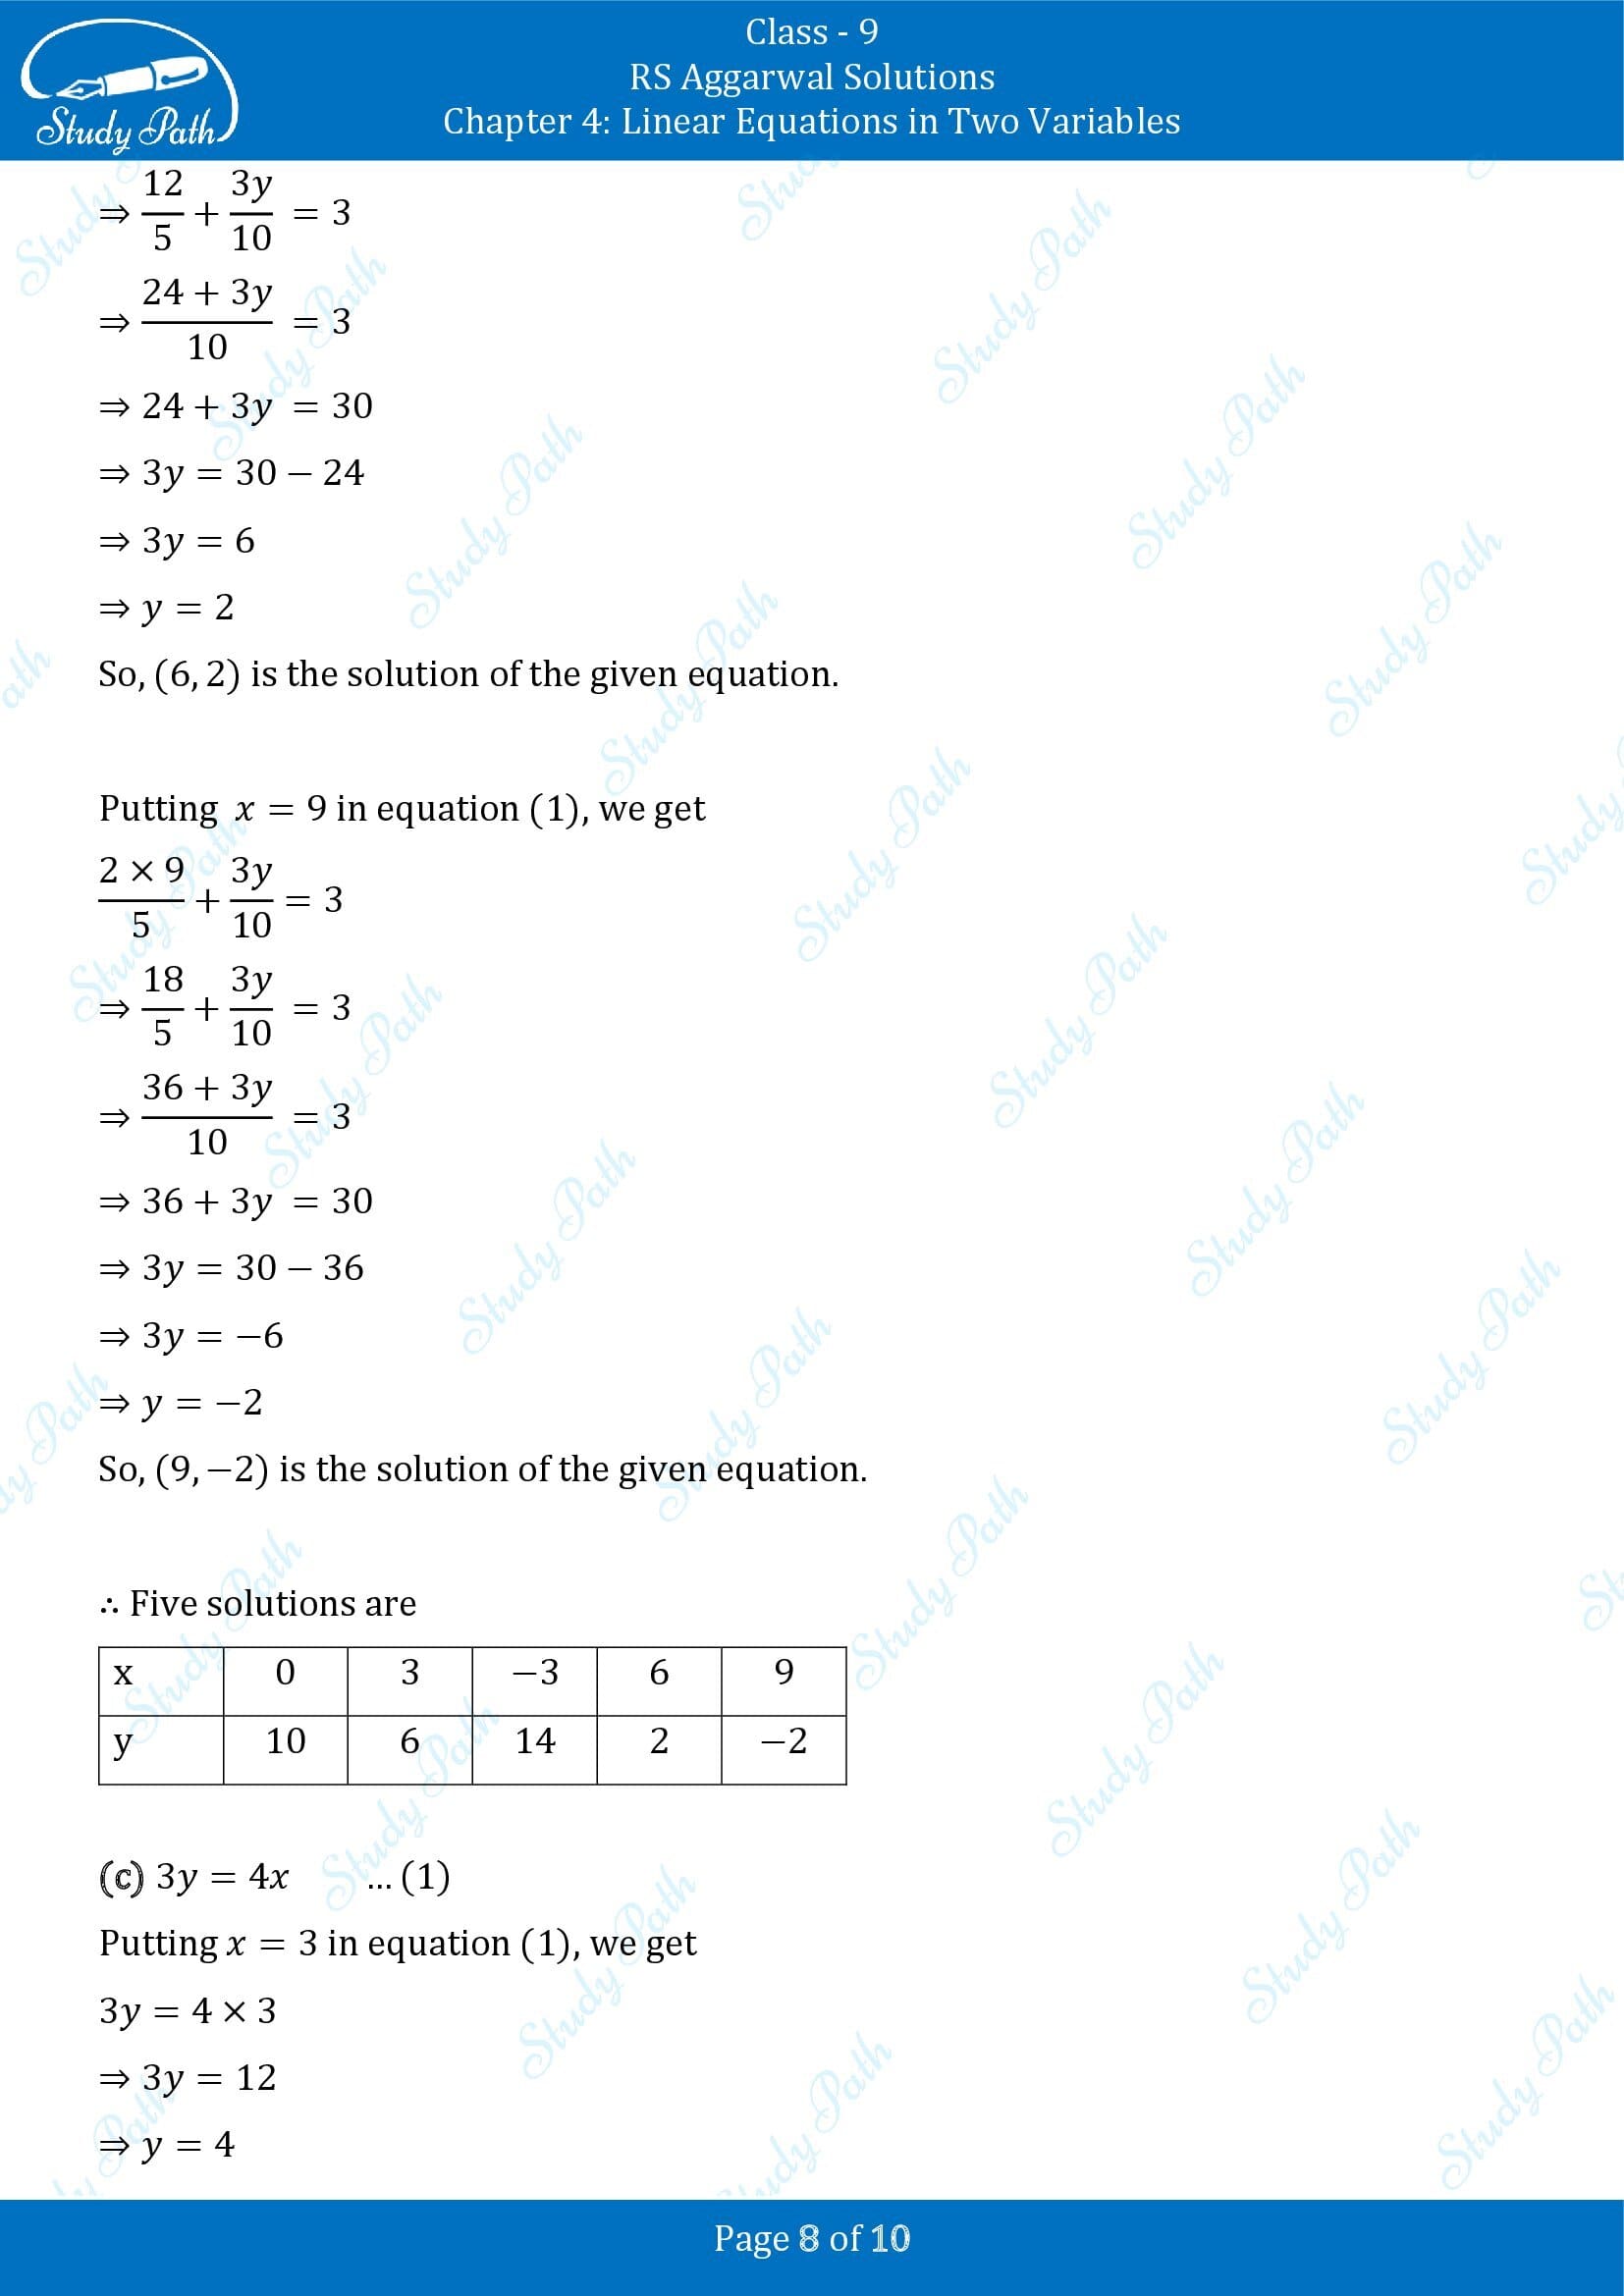 RS Aggarwal Solutions Class 9 Chapter 4 Linear Equations in Two Variables Exercise 4A 0008